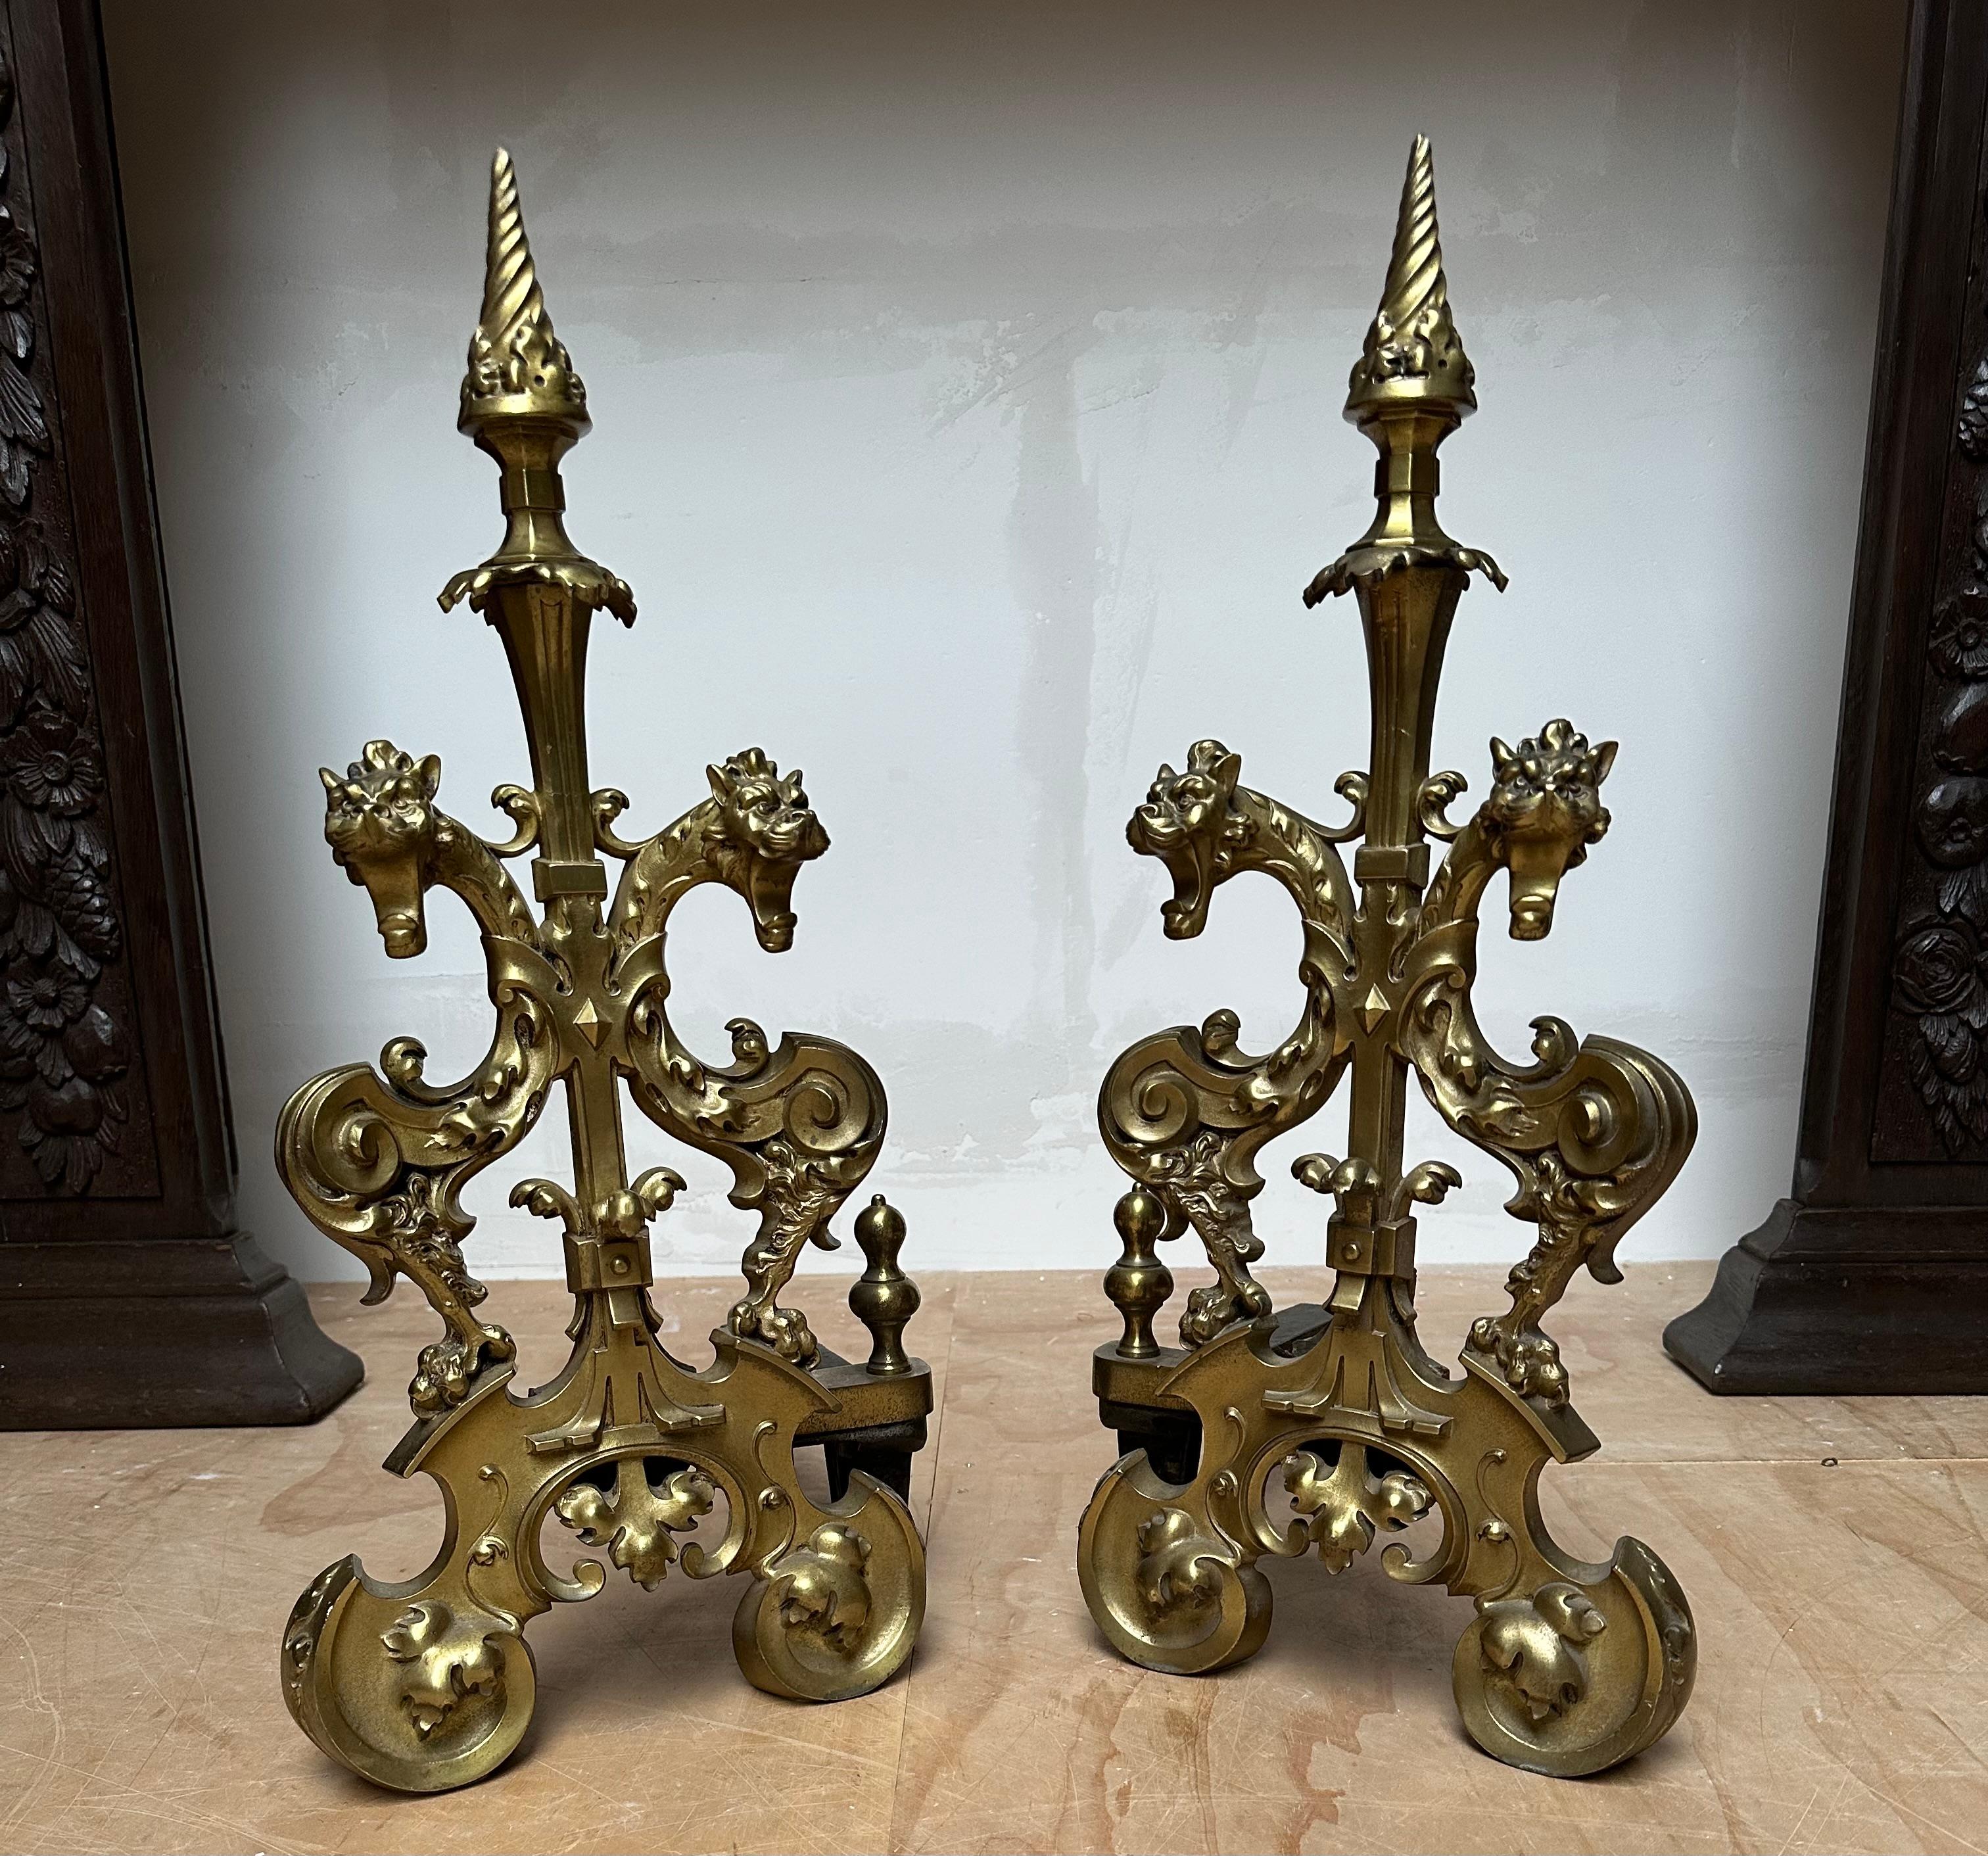 Hand-Crafted Antique Gothic Revival Gilt Bronze Dragon Andirons or Firedogs / Fireplace Tools For Sale